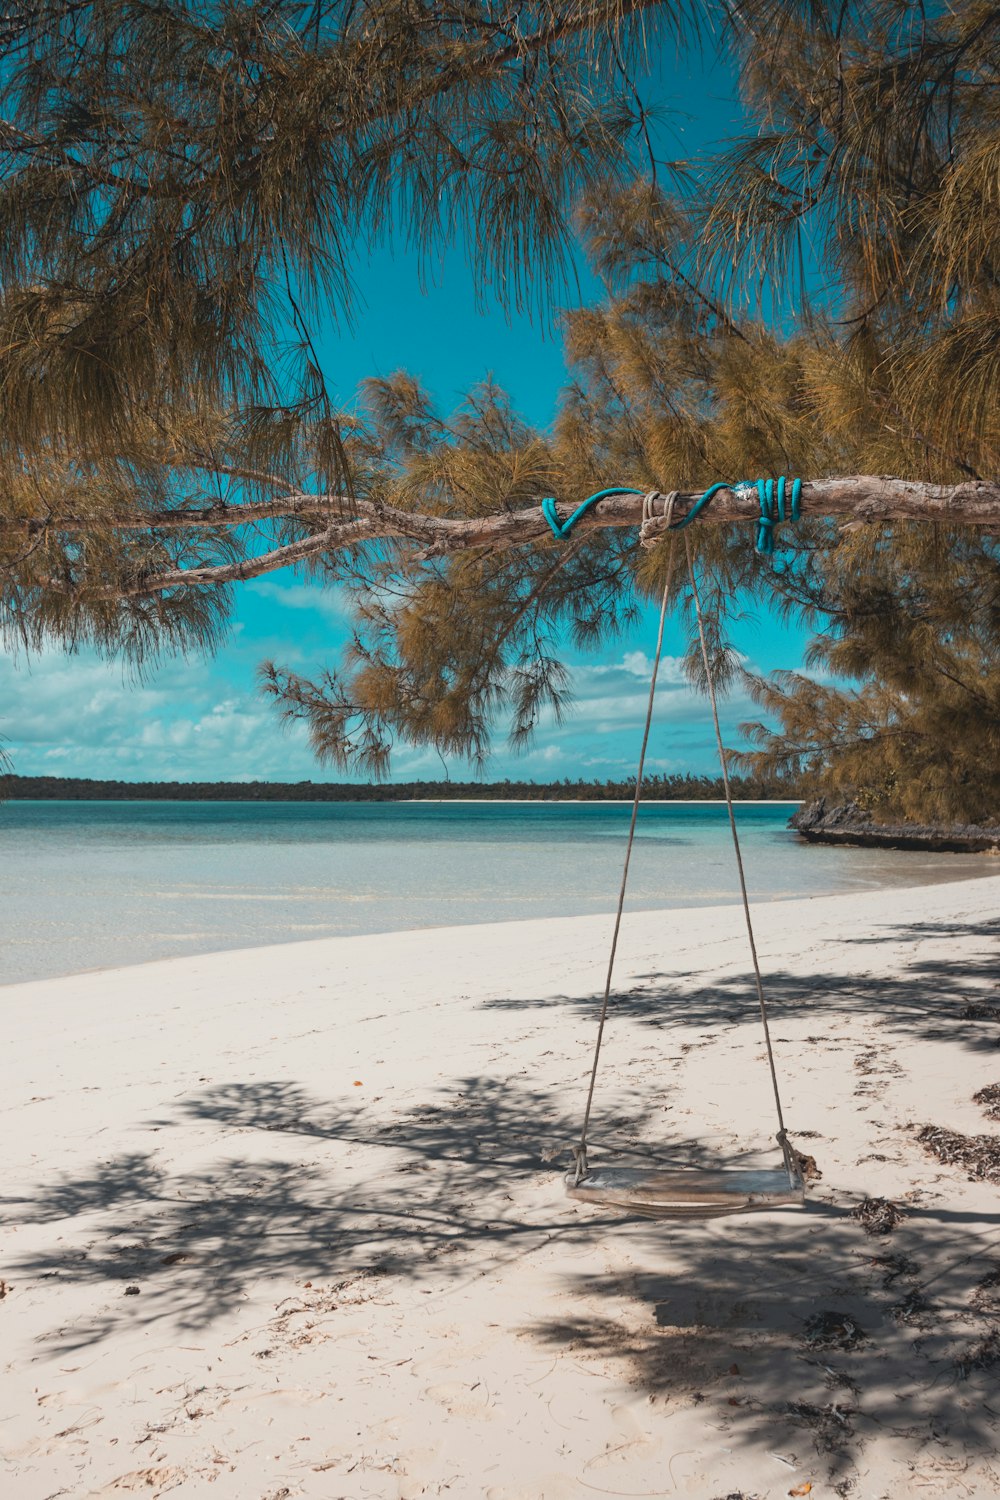 a tree branch hanging over a beach with a body of water in the background